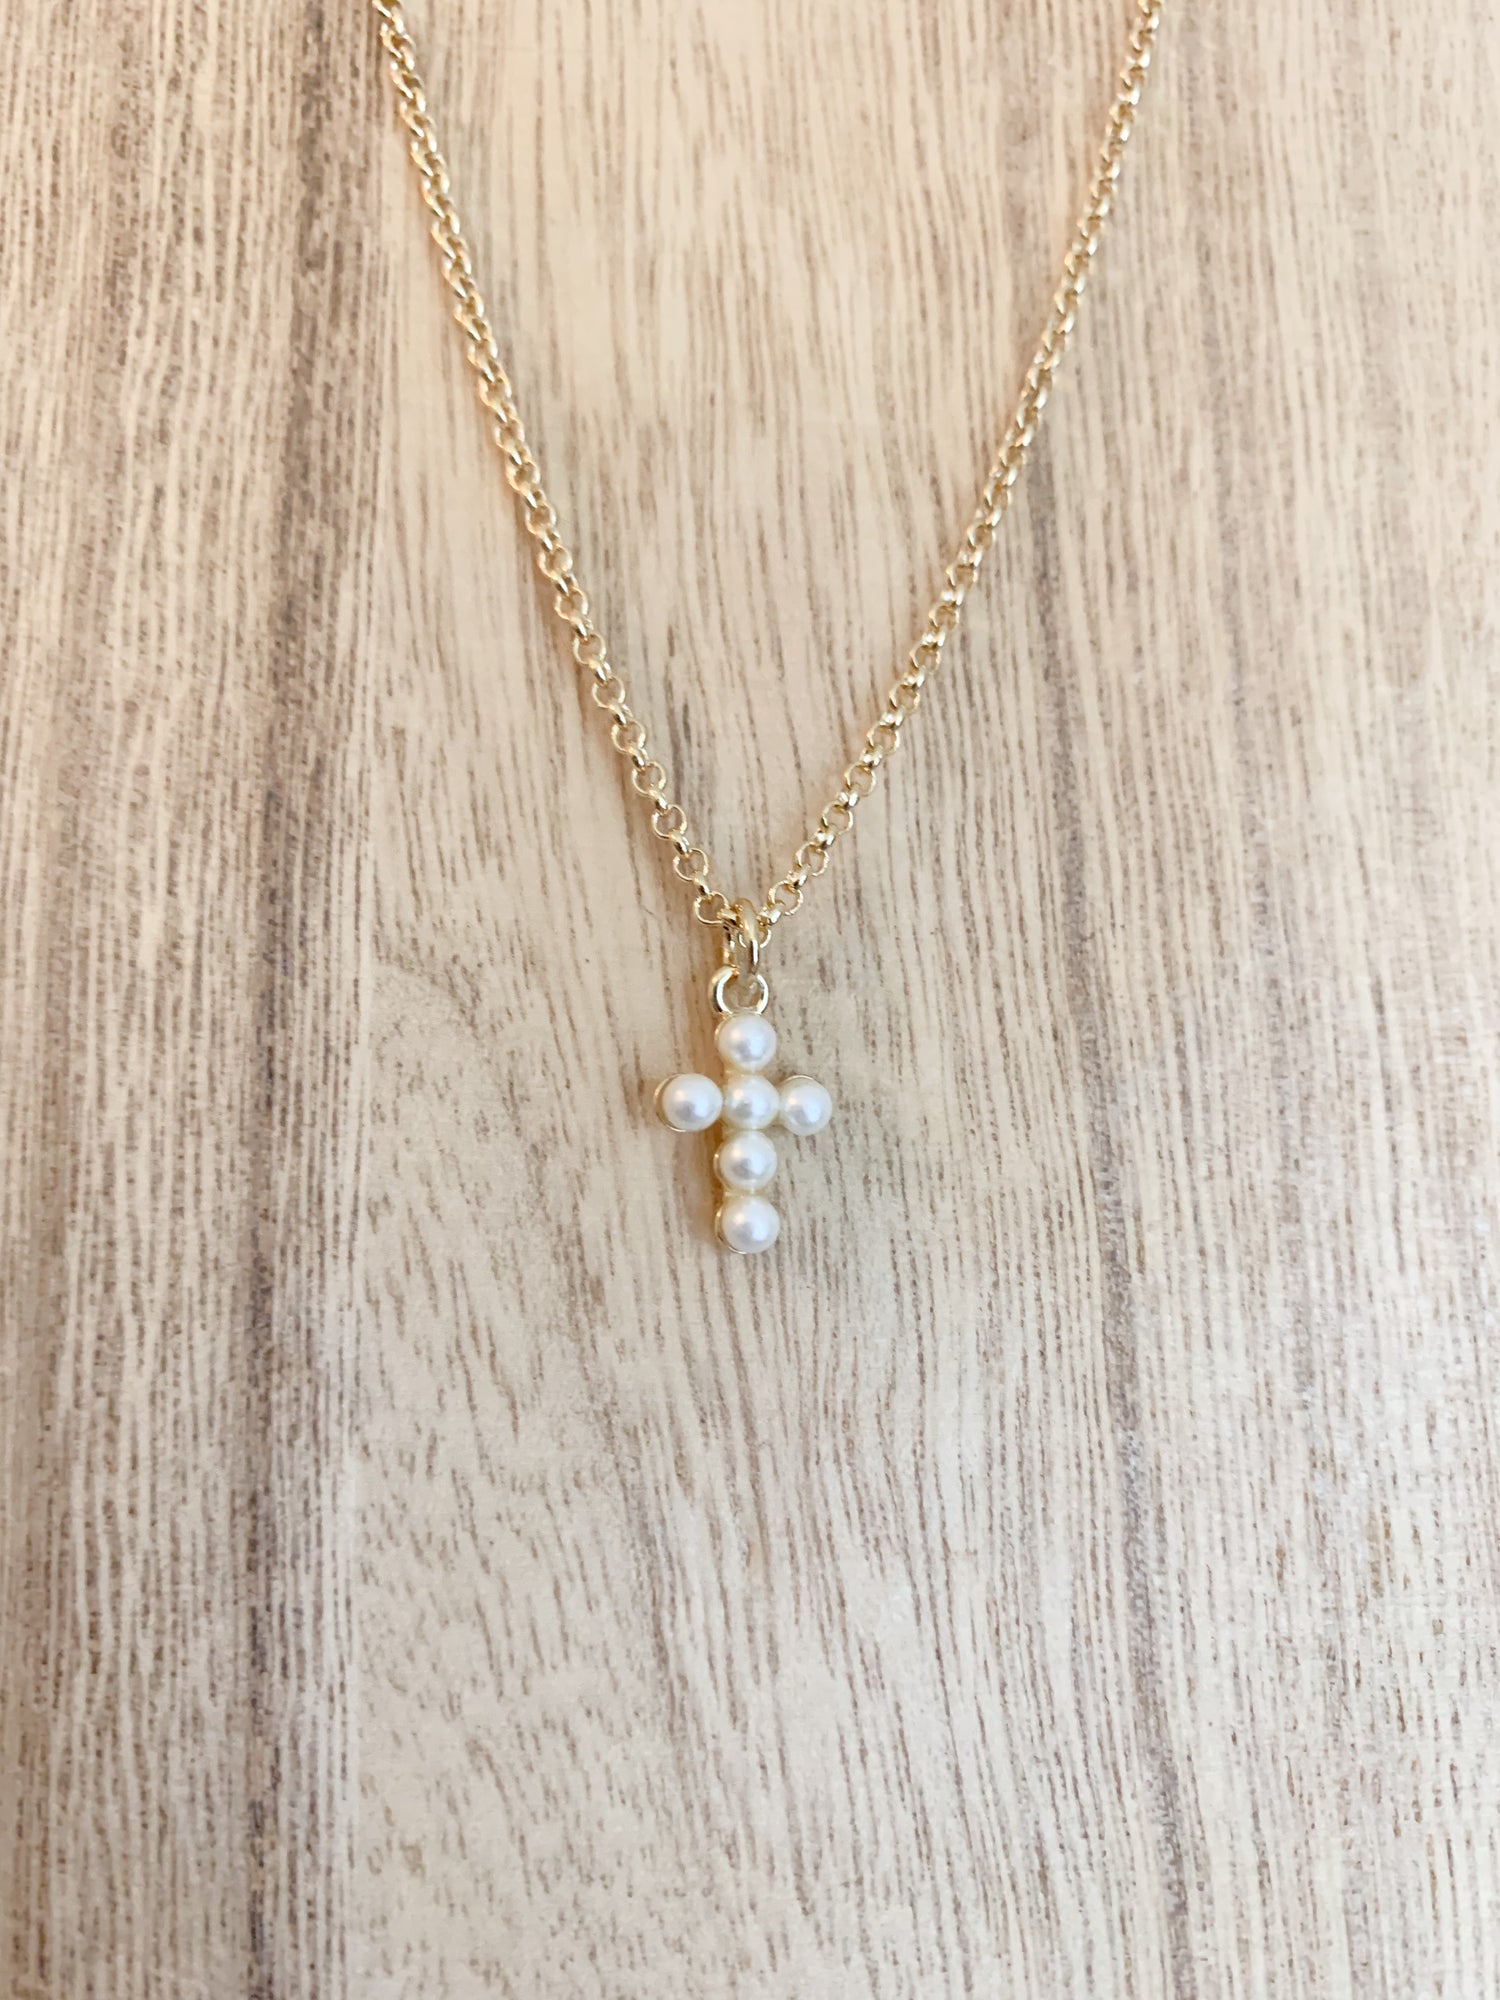 18k gold plated pearl cross necklace on a white background, with the cross centerpiece in focus. A beautiful and elegant jewelry piece to add to your collection.